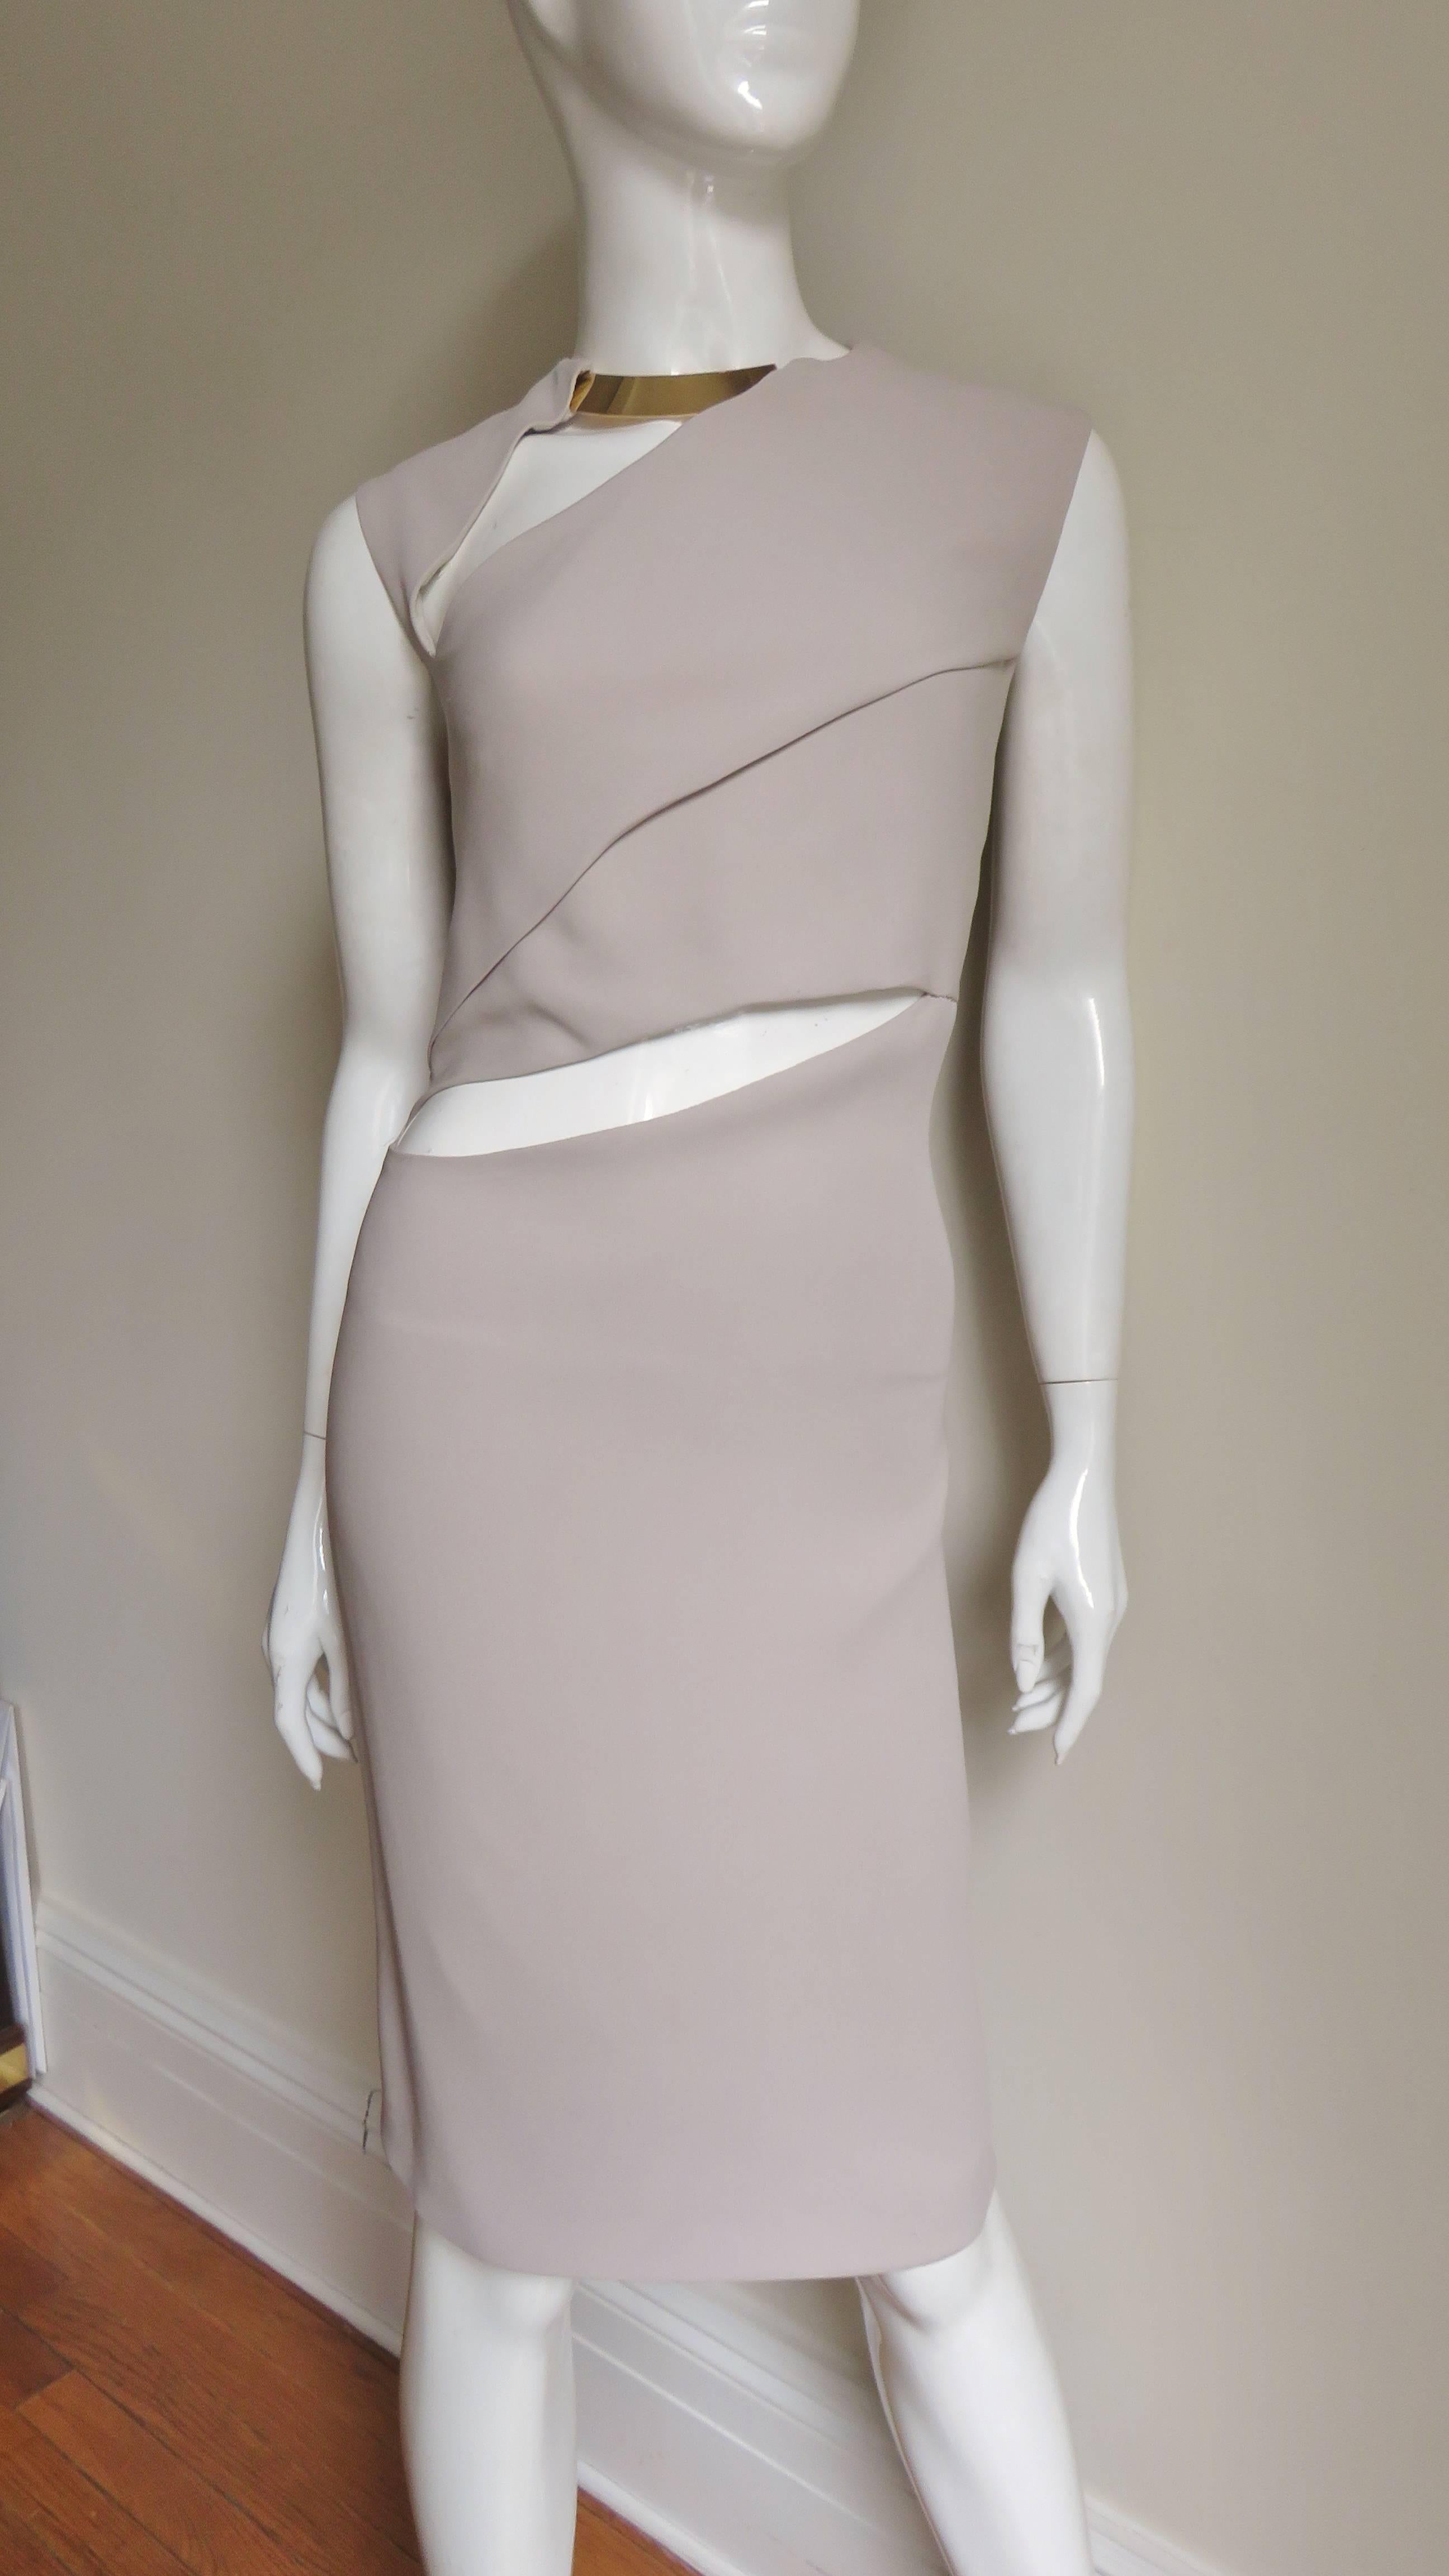 A fabulous light taupe dress by Tom Ford for Gucci.  It has a gold metal collar exposed at the front neck with a diagonal wedge cut out below it, another cut out and fold diagonally are at the waist.  The skirt is straight, there is a matching back